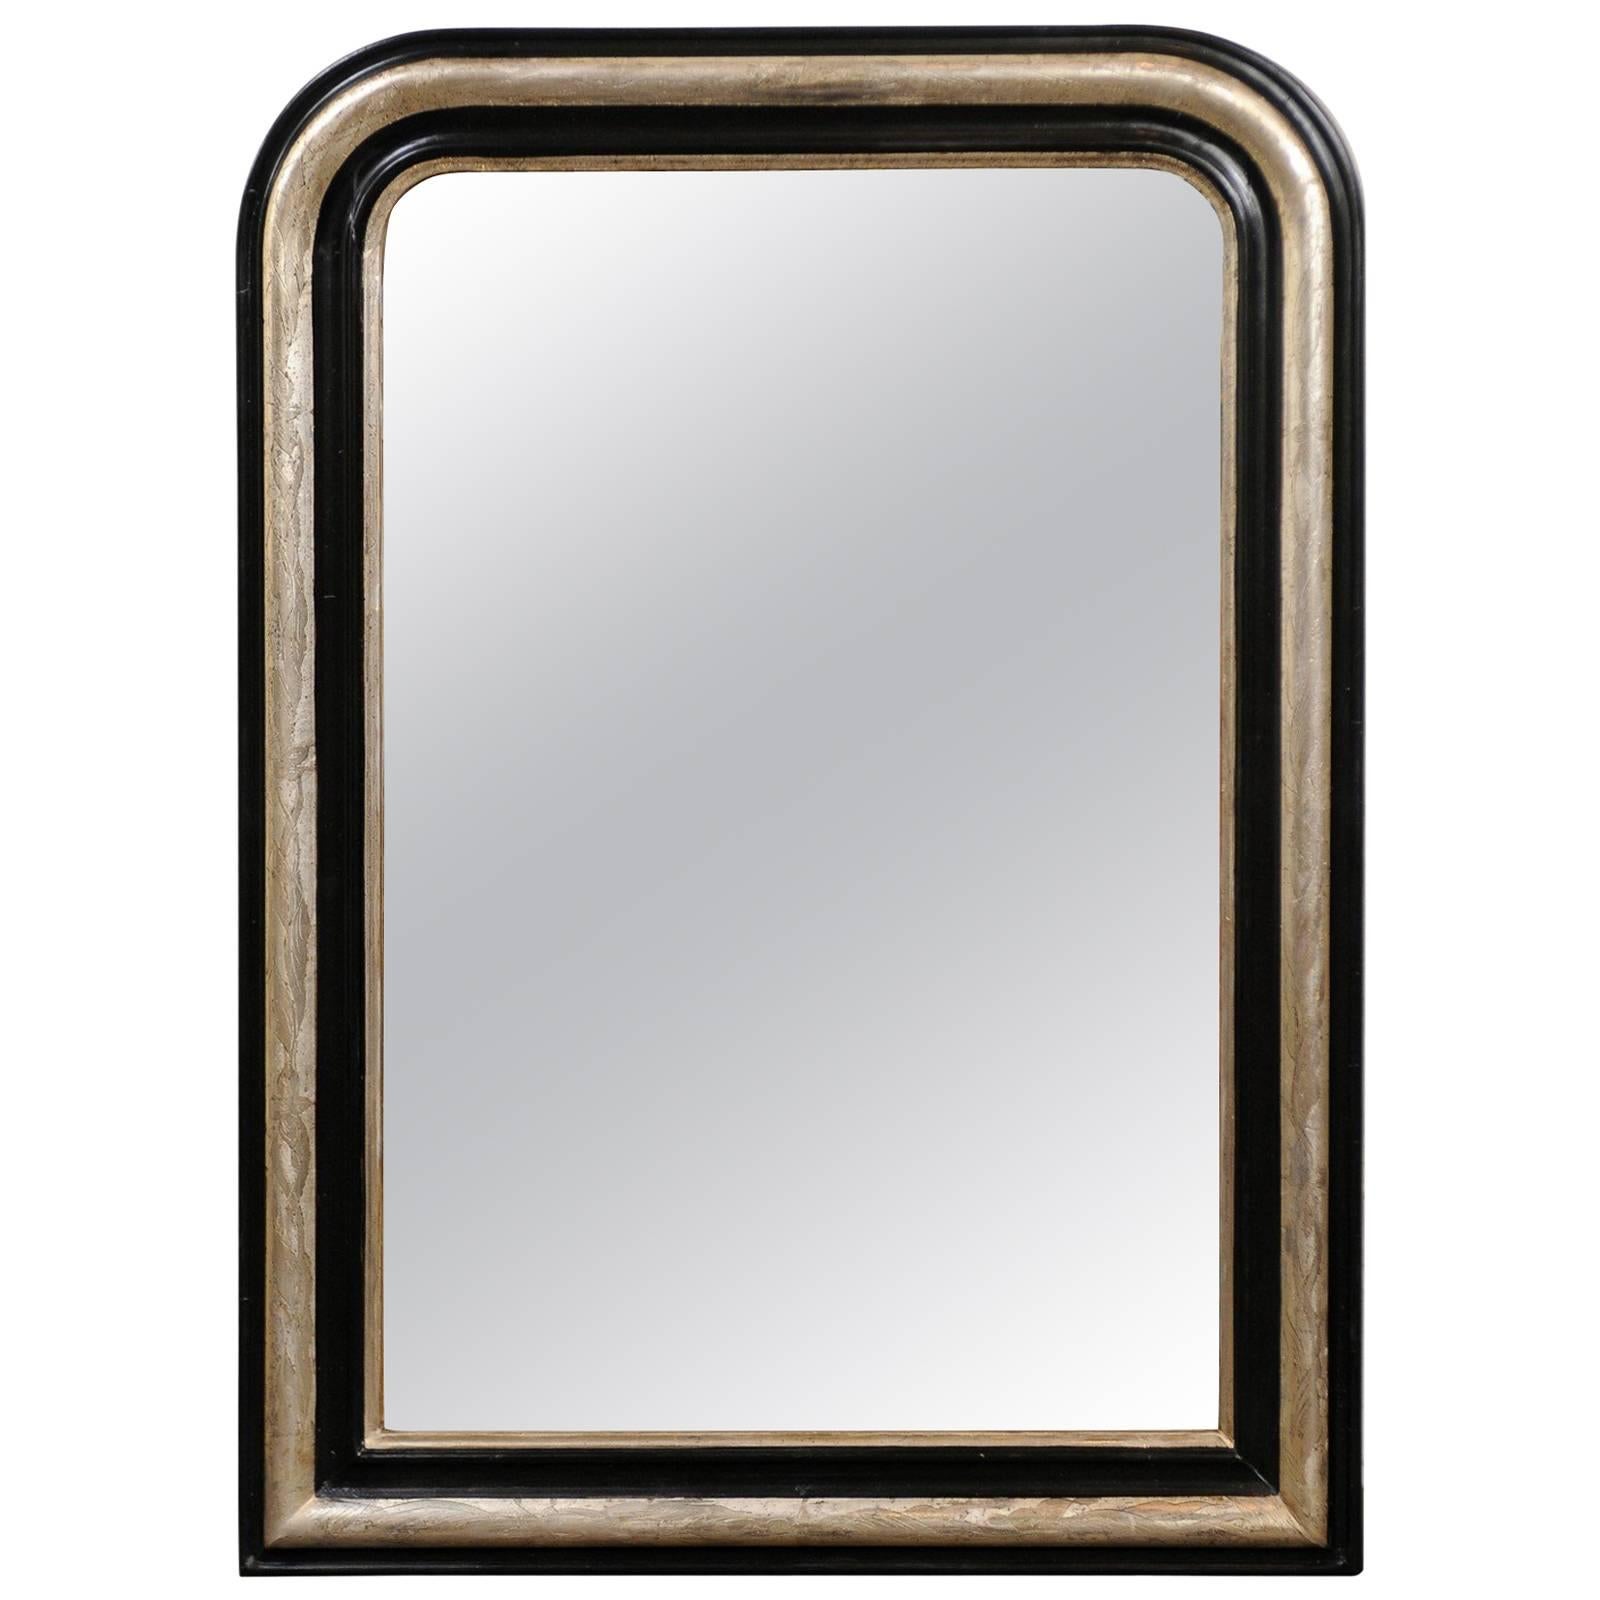 French Turn of the Century Ebonized Wood and Silver Gilded Louis-Philippe Mirror